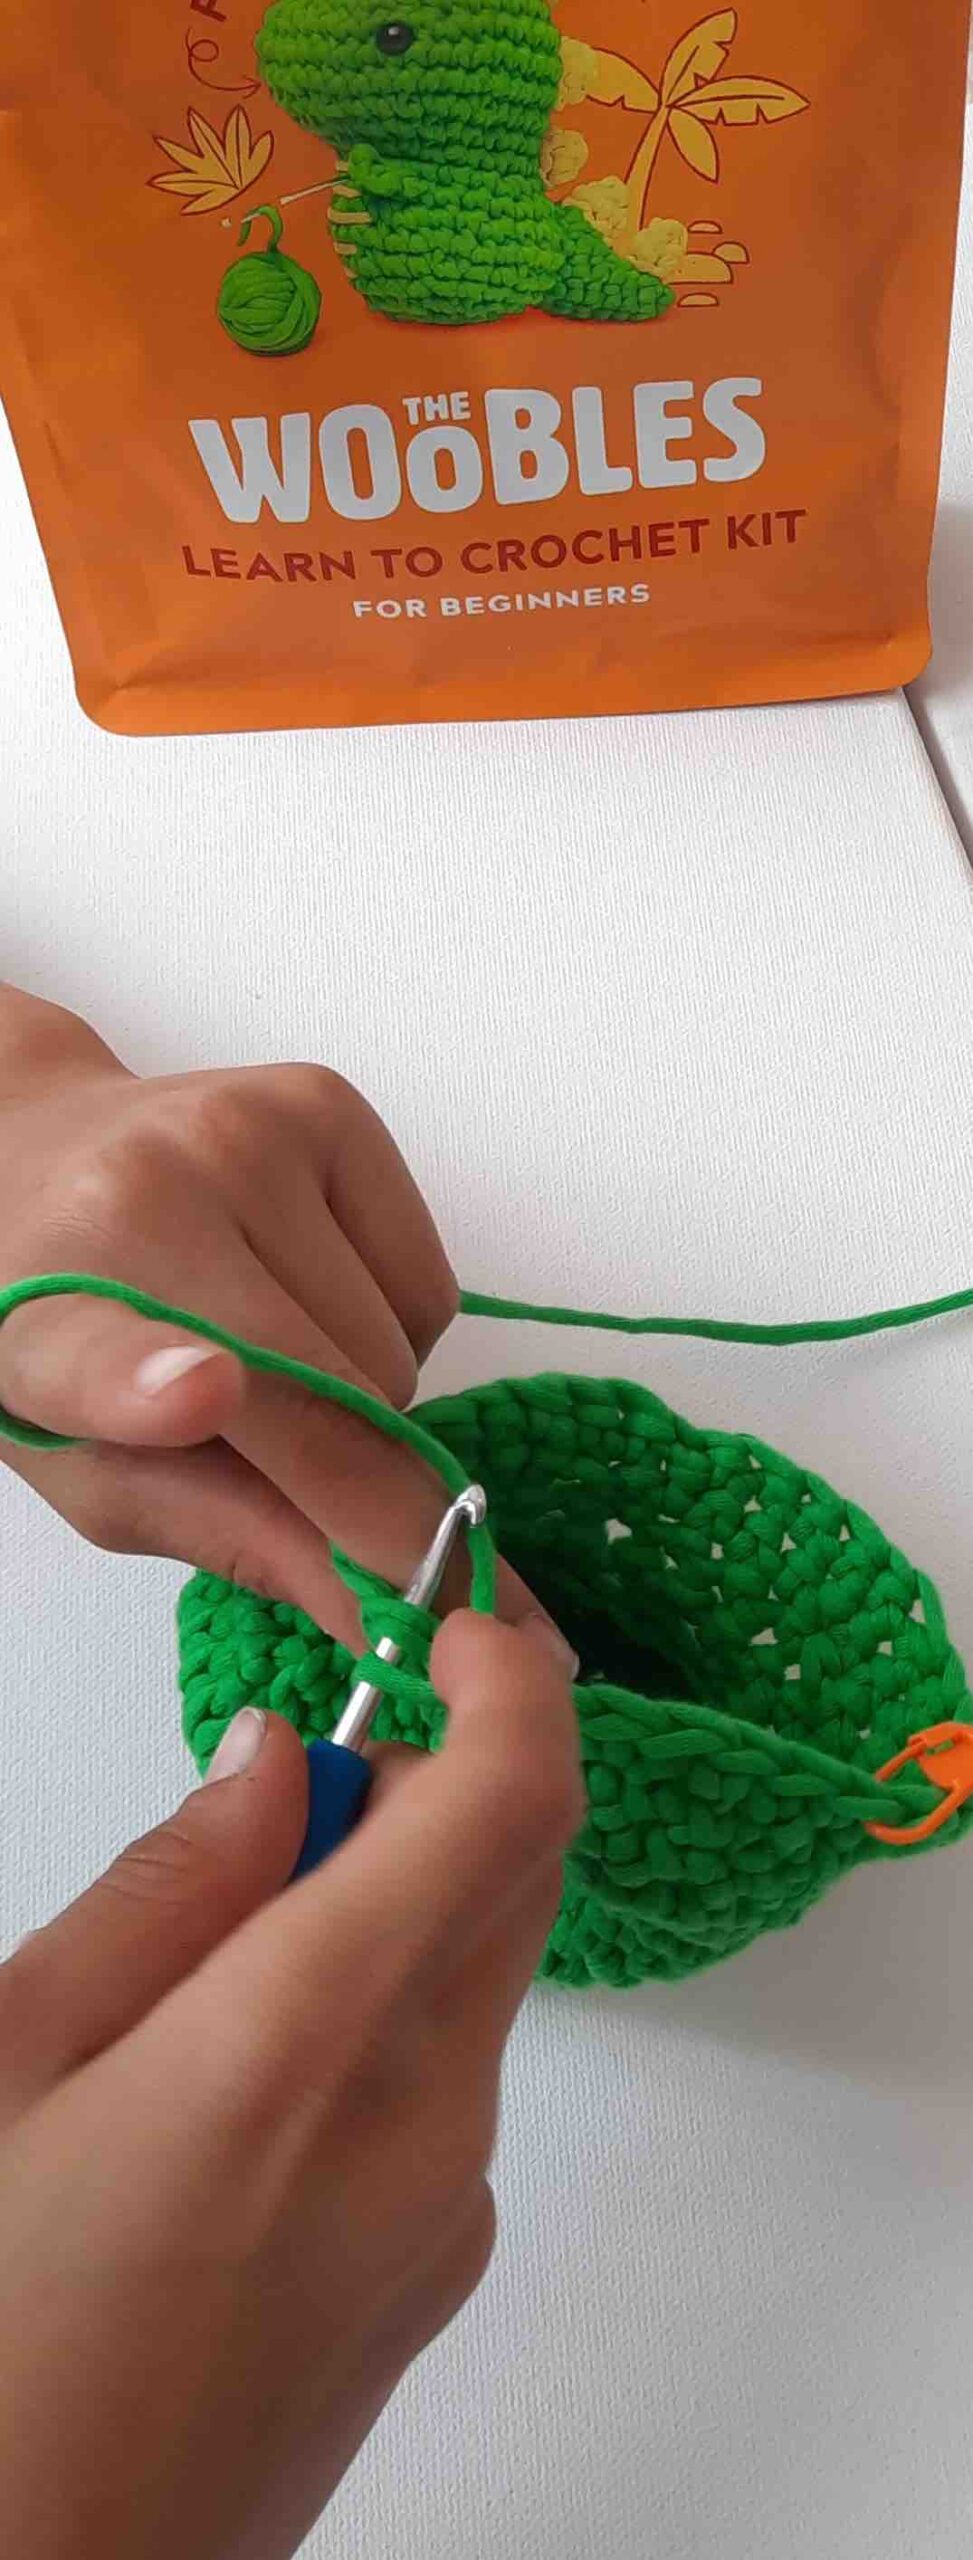 How To Teach A 7 Year Old To Crochet